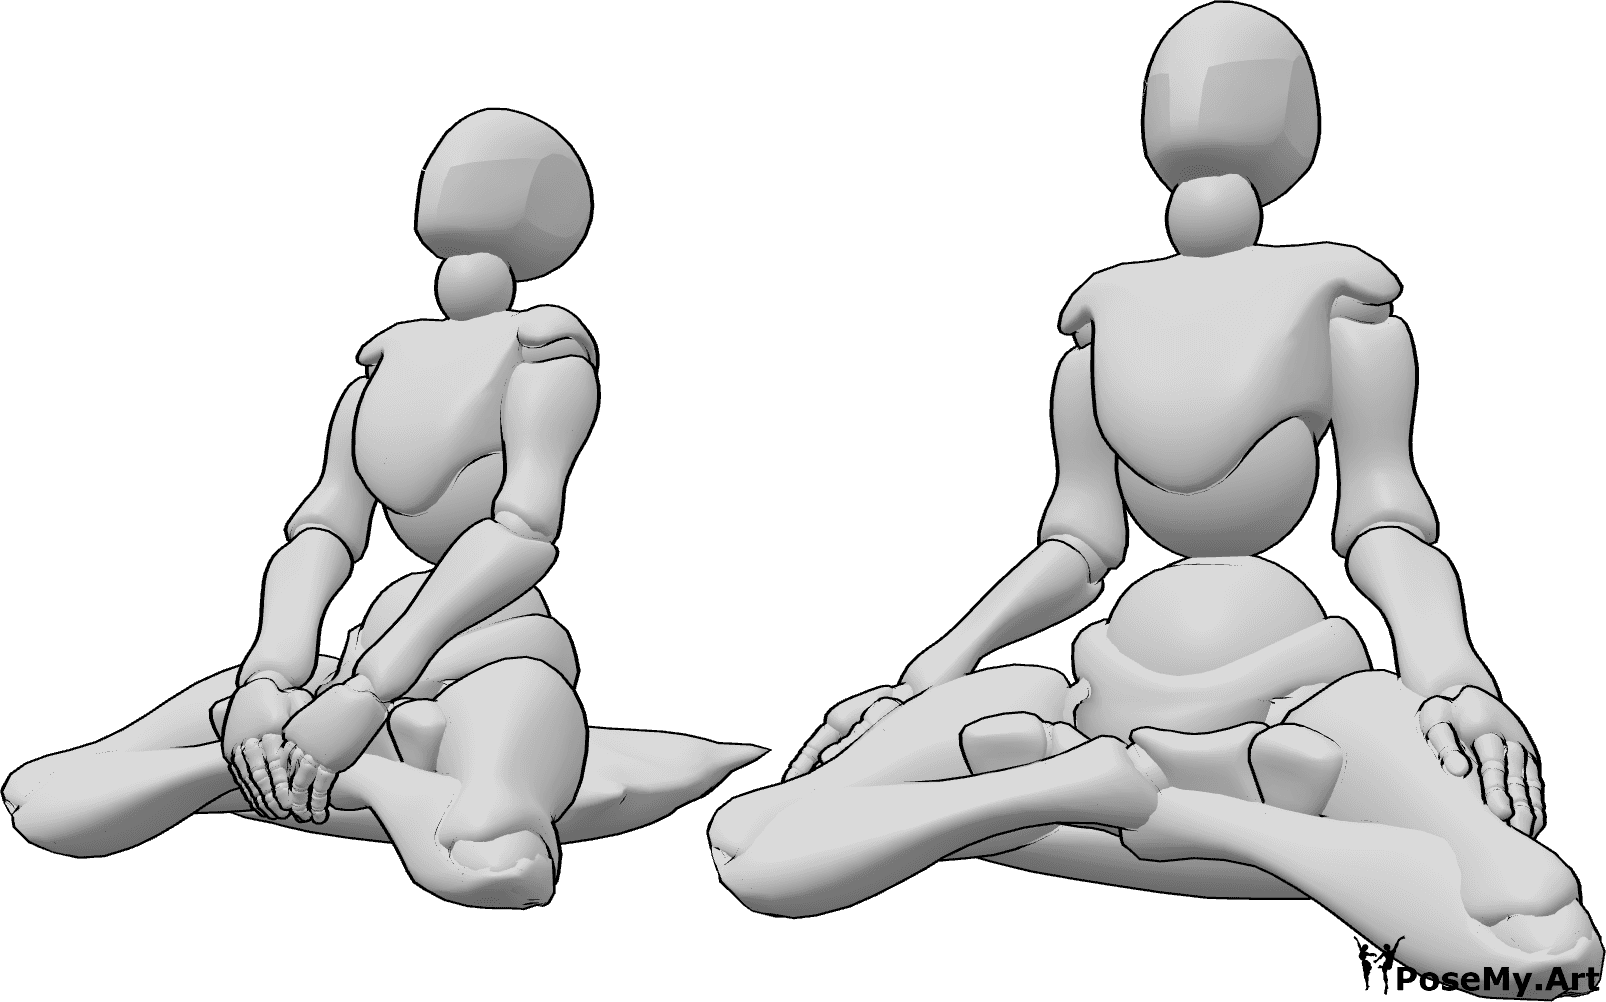 Pose Reference- Two females meditation pose - Two females are meditating, sitting with their knees on the ground and turning their faces upwards